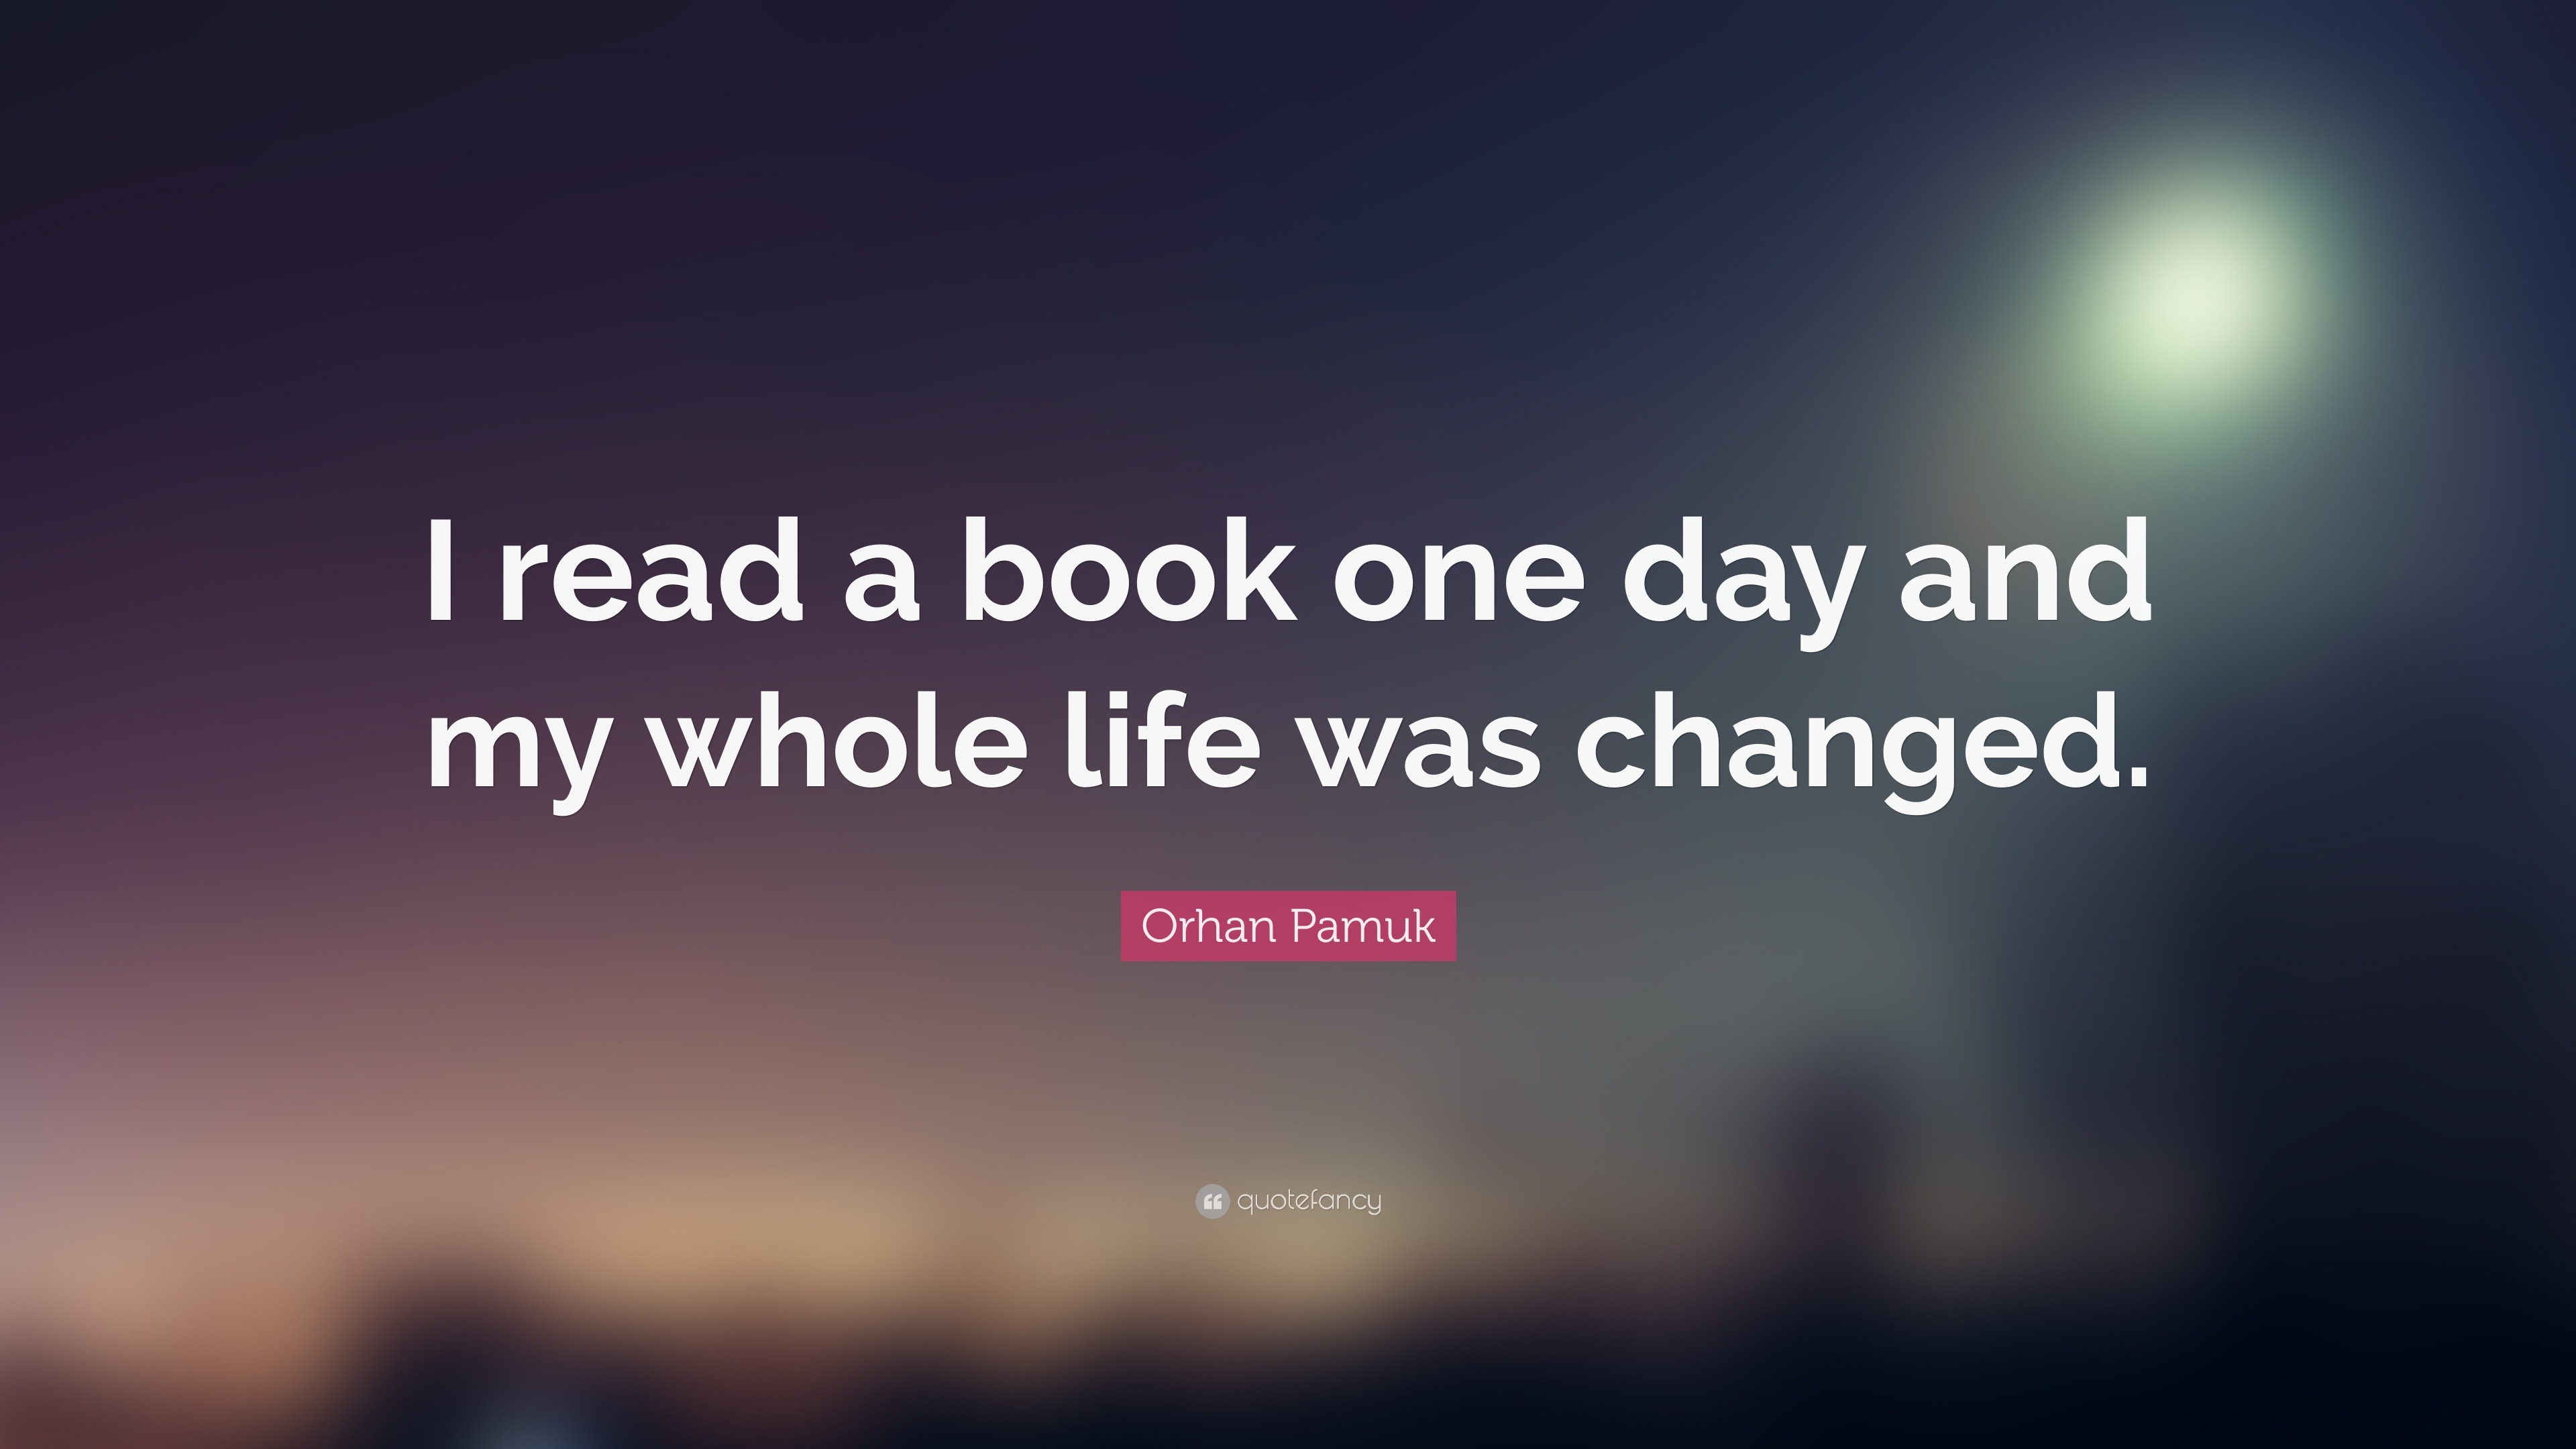 Orhan Pamuk Quote: “I Read A Book One Day And My Whole Life Was Changed.”